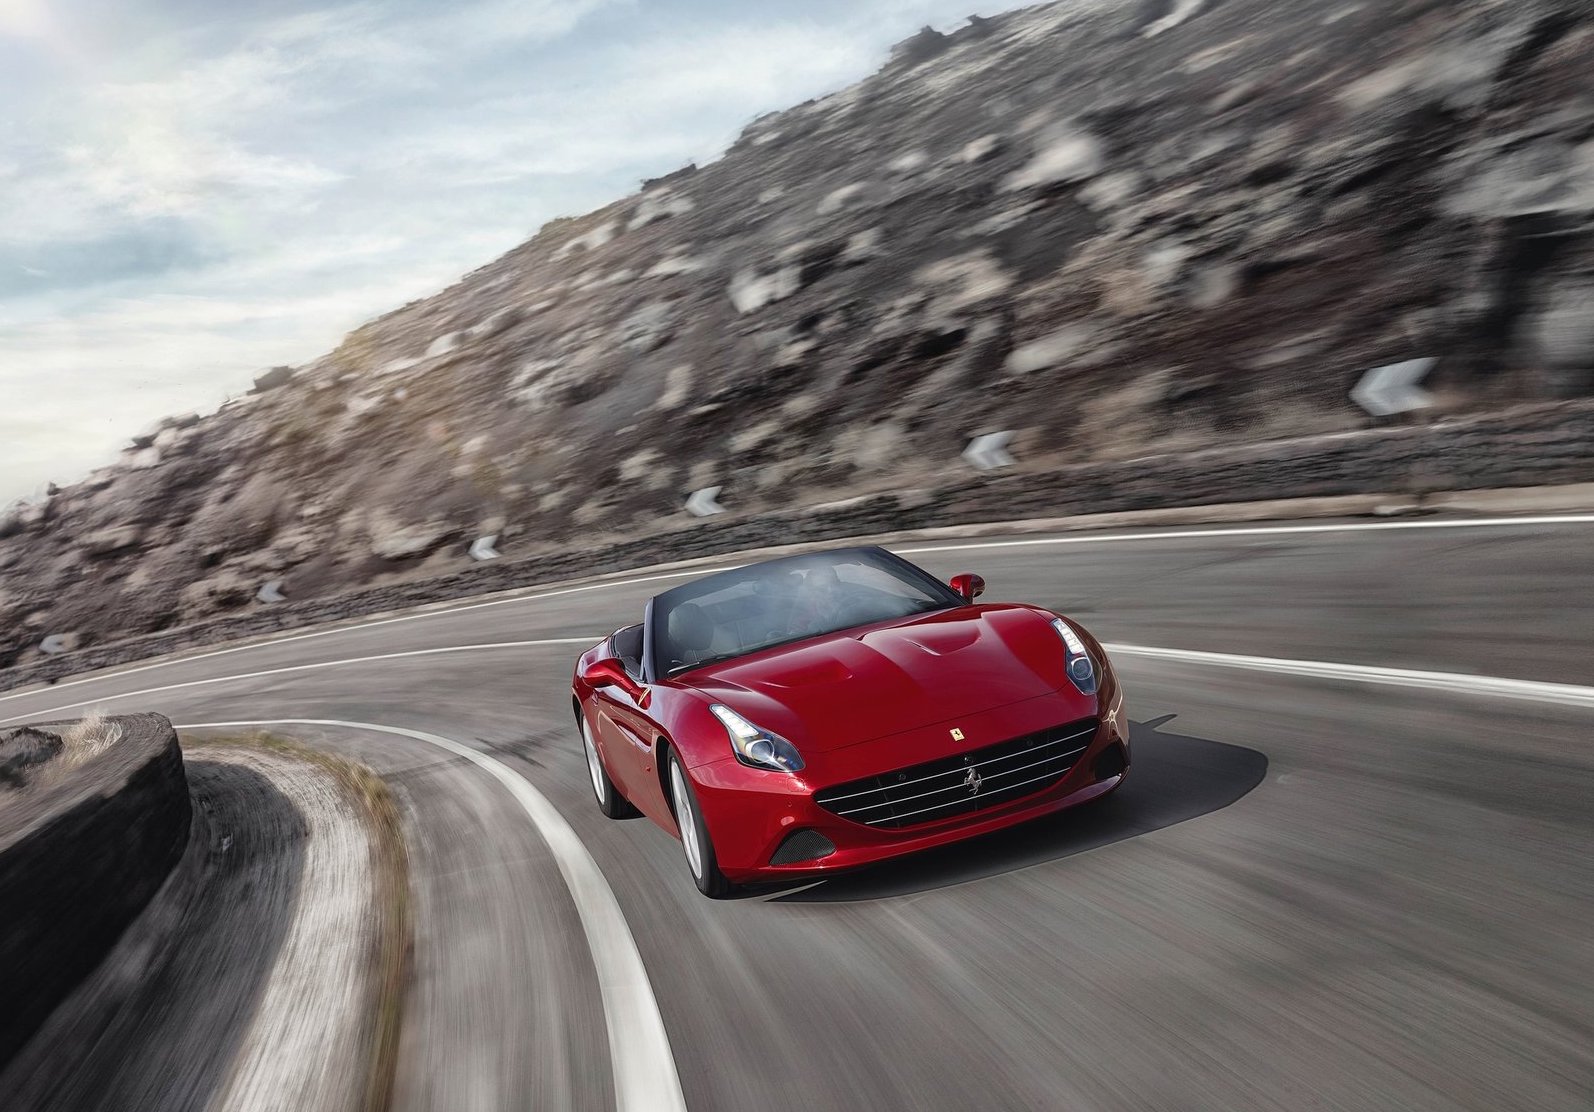 a red Ferrari driving fast on a winding mountain road